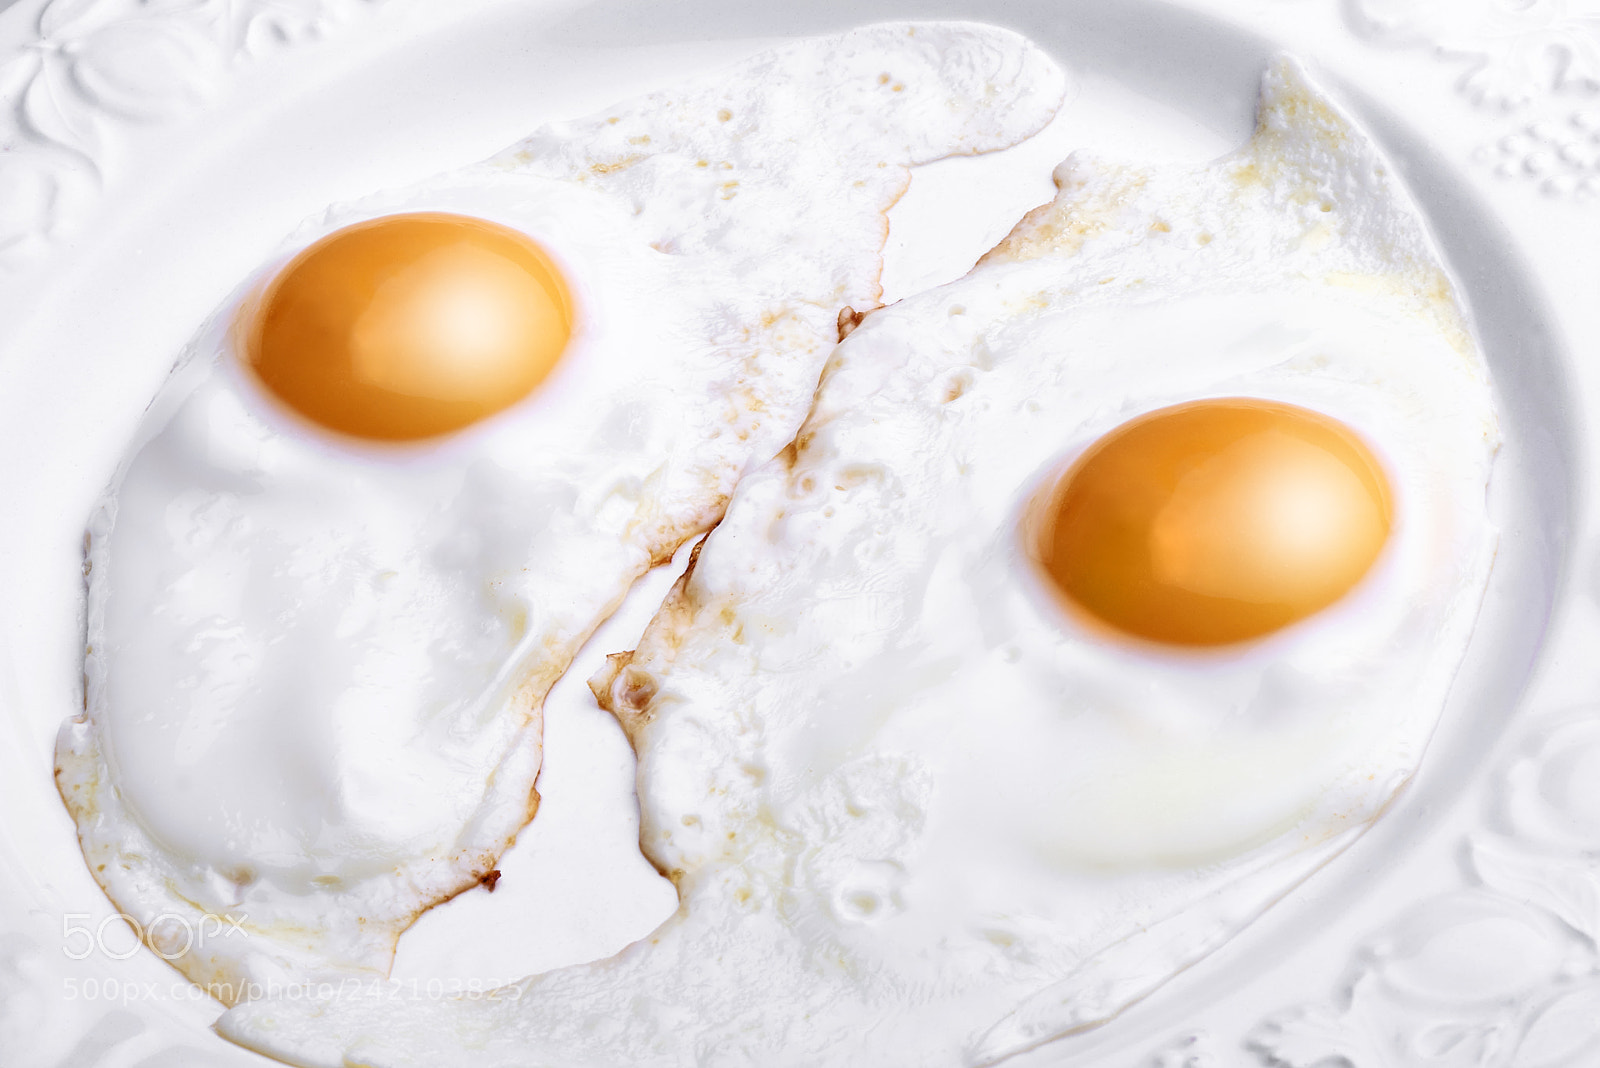 Nikon D800E sample photo. Two eggs baked and photography